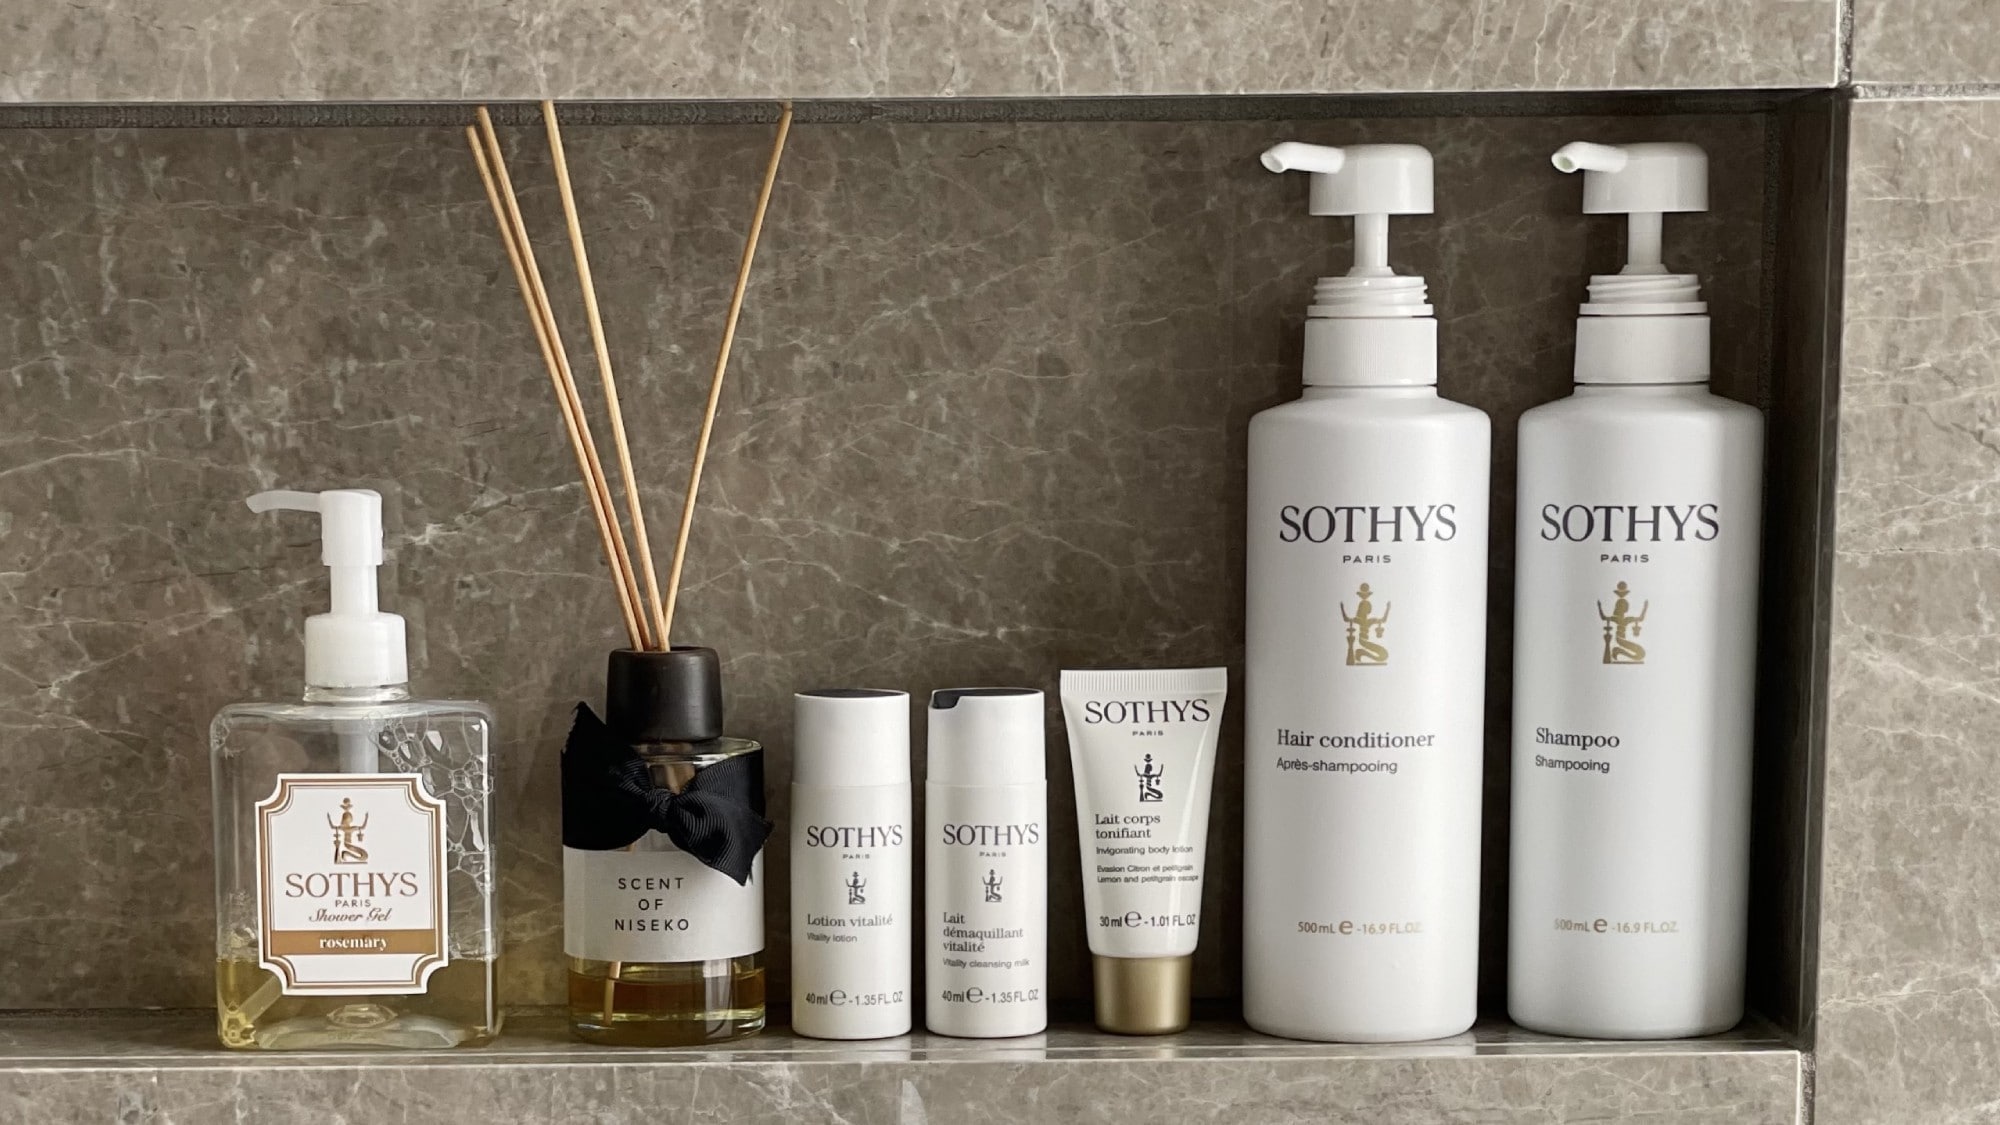 ◆ Guest room amenities are French luxury brand "Sotis". Hotel original soap in collaboration with local sake brewery.